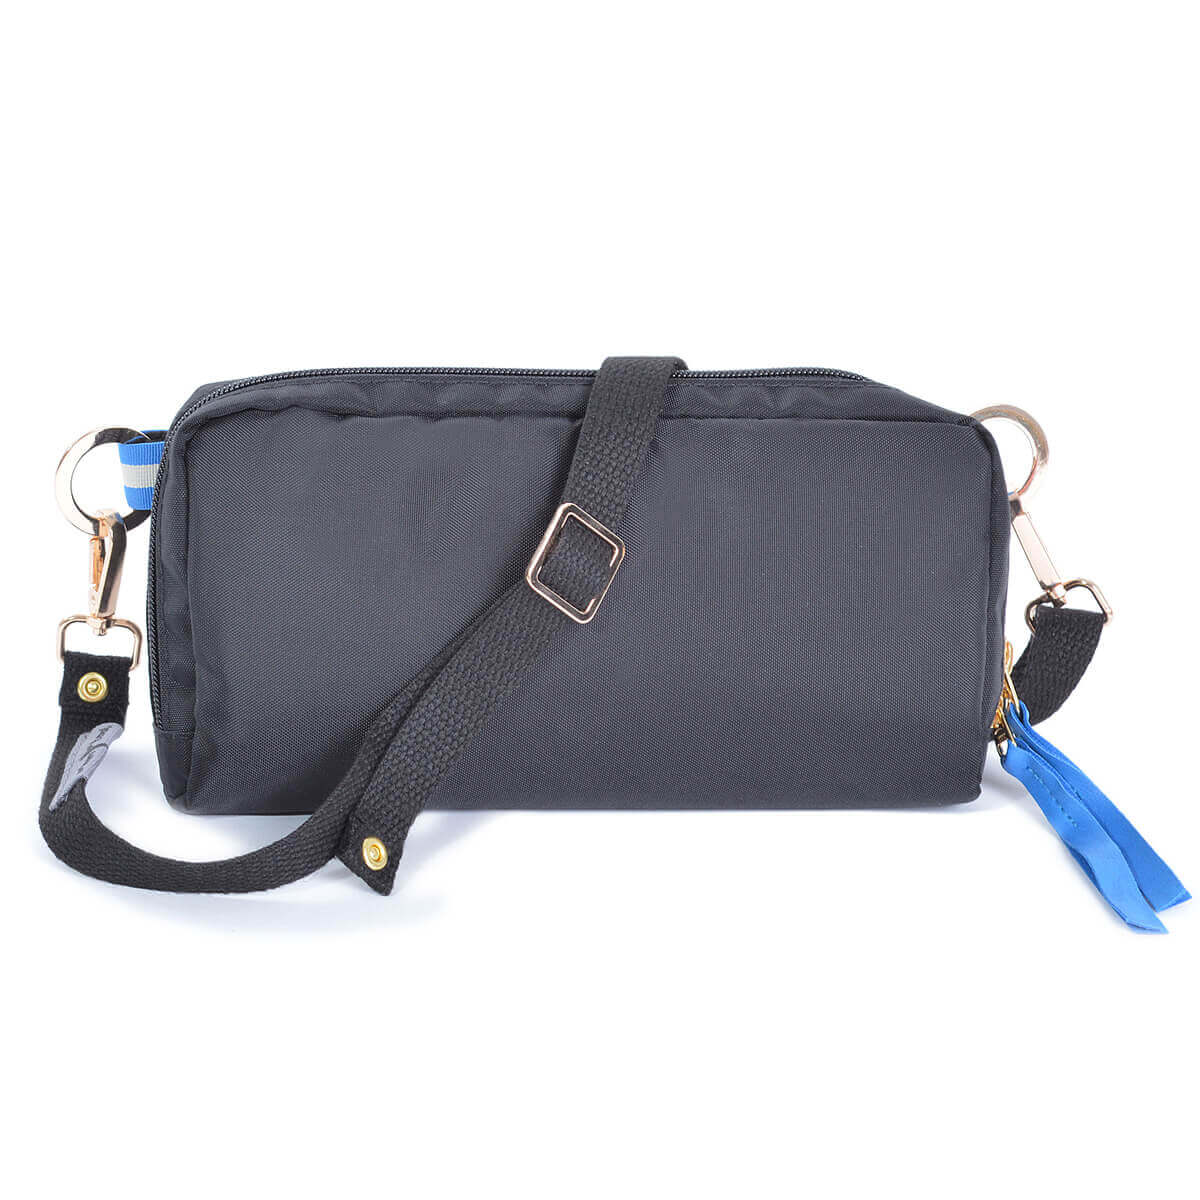 Travel purse for secure & light weight travel. Fits women´s wallets